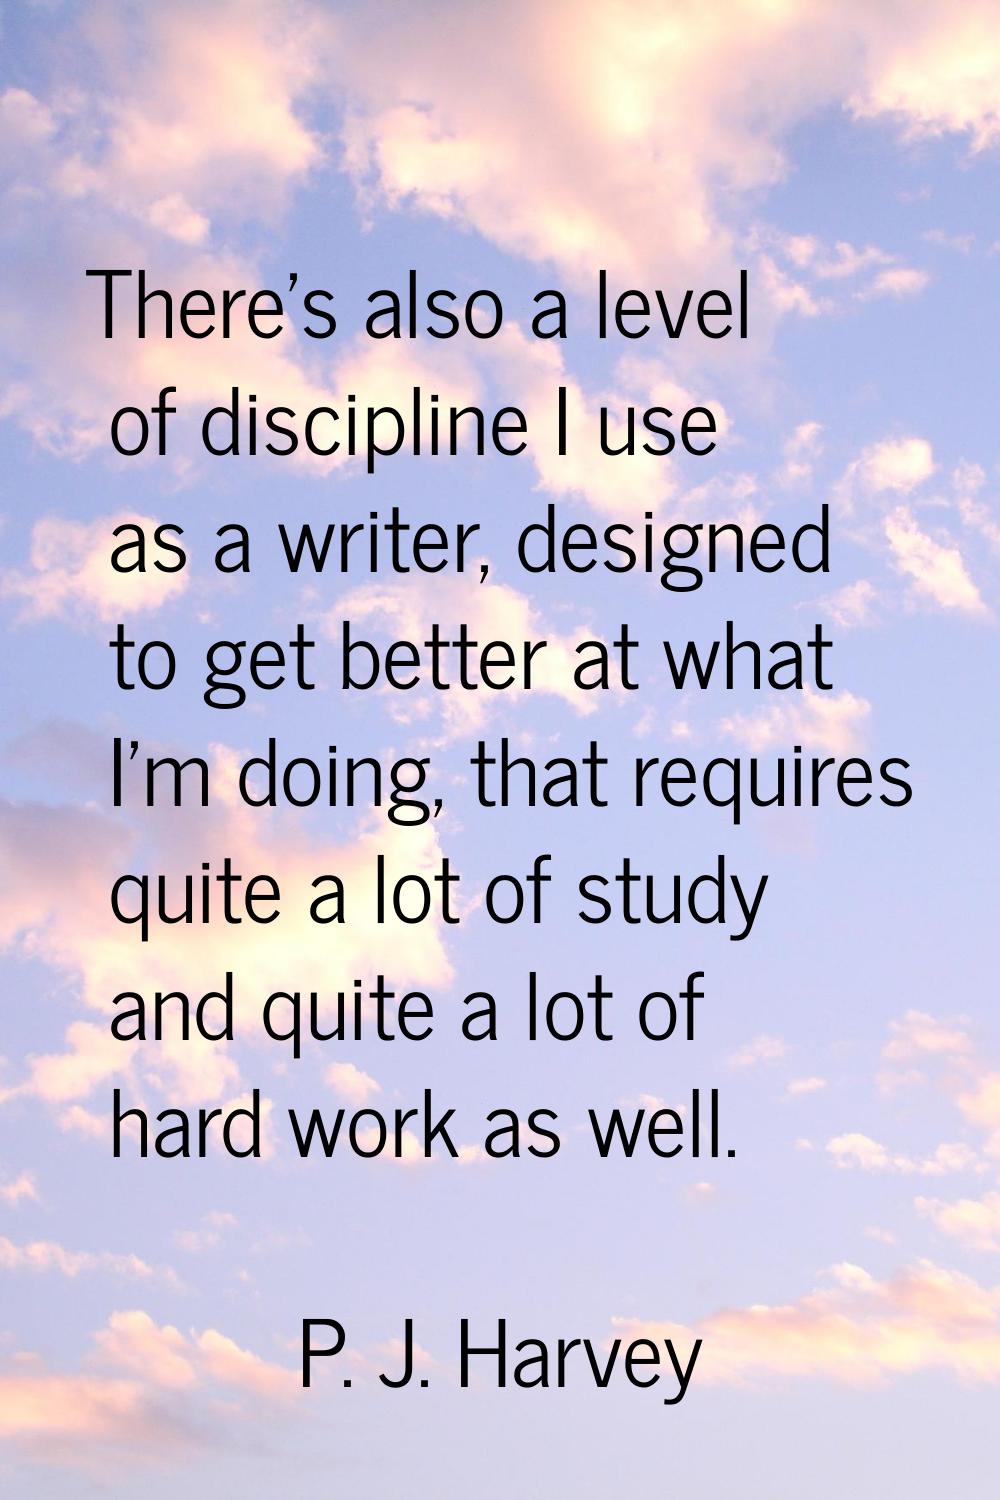 There's also a level of discipline I use as a writer, designed to get better at what I'm doing, tha